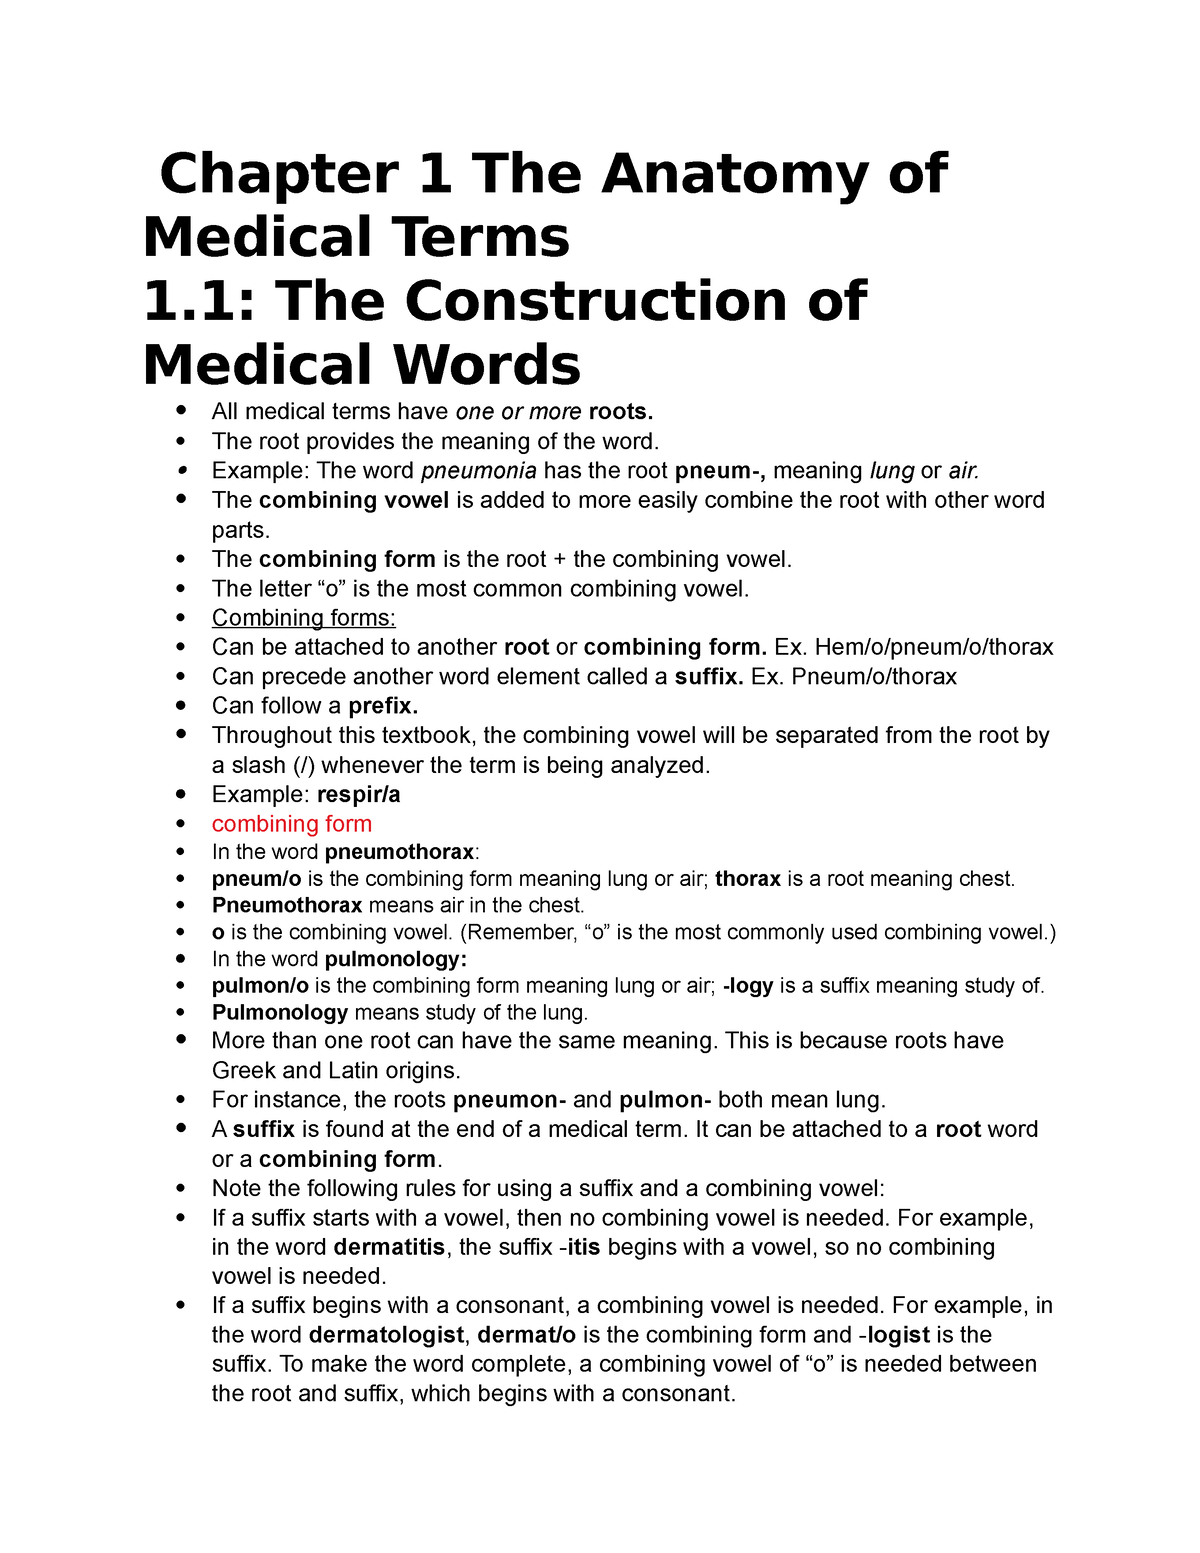 chapter-1-med-term-notes-chapter-1-the-anatomy-of-medical-terms-1